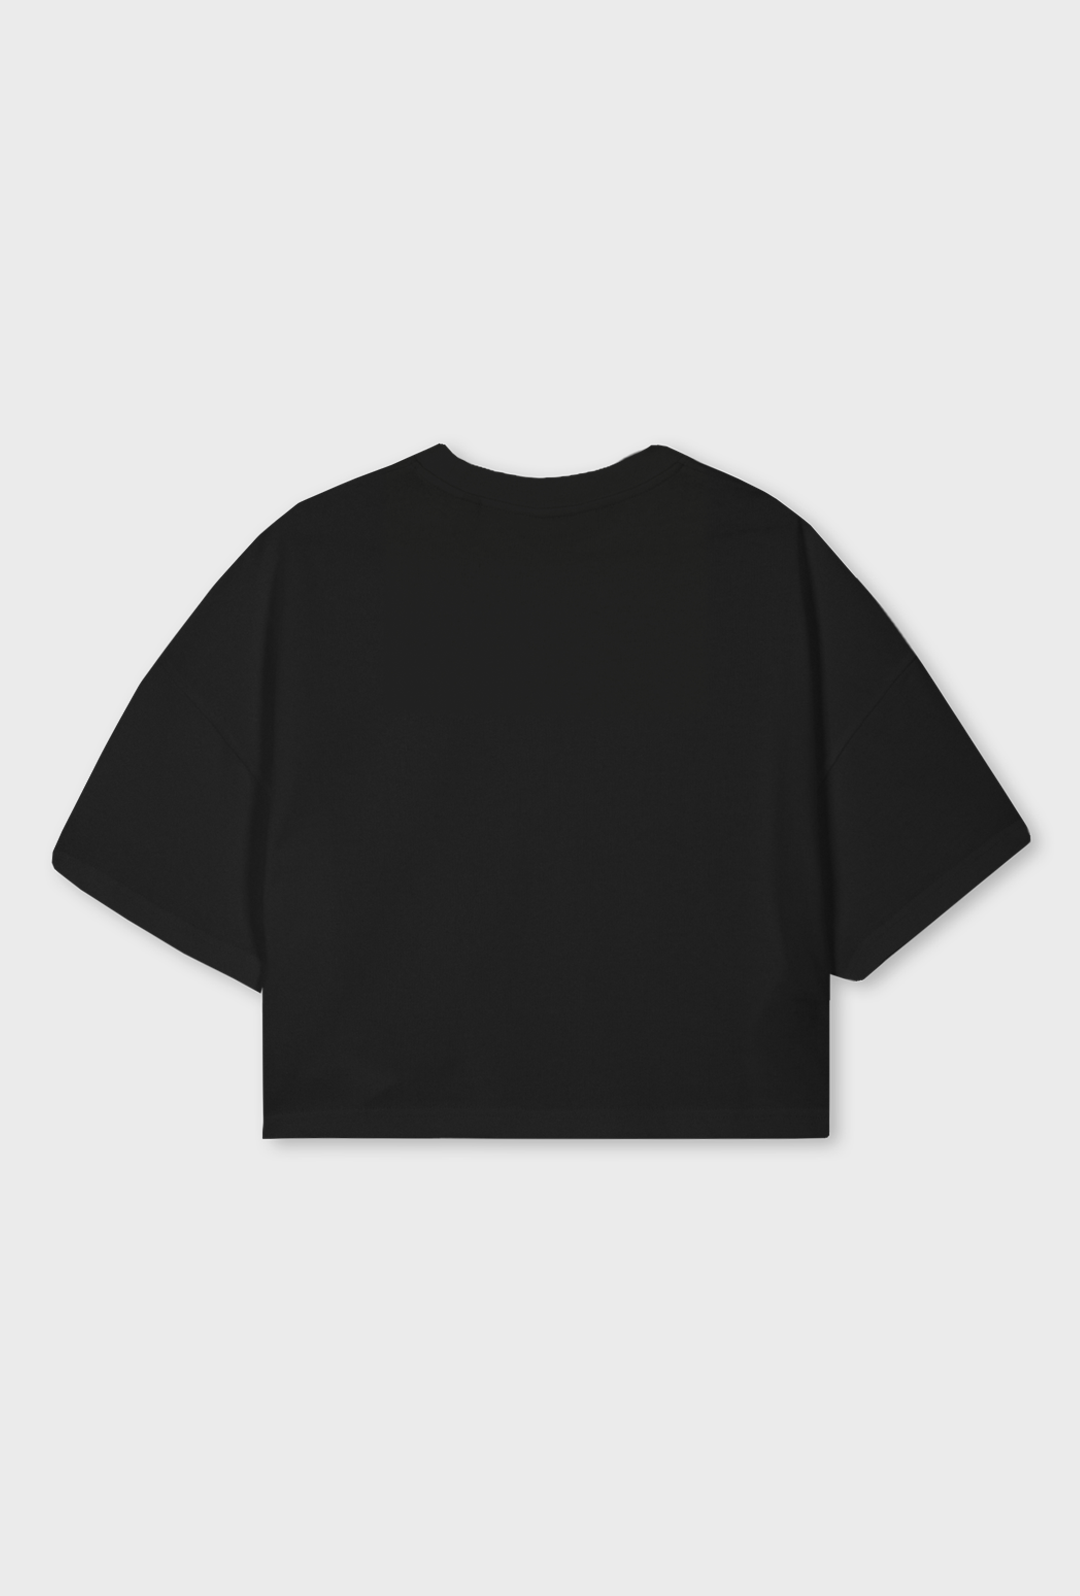 oversized women's midnight black cropped tee with roller style that moves luxury fashion skate back